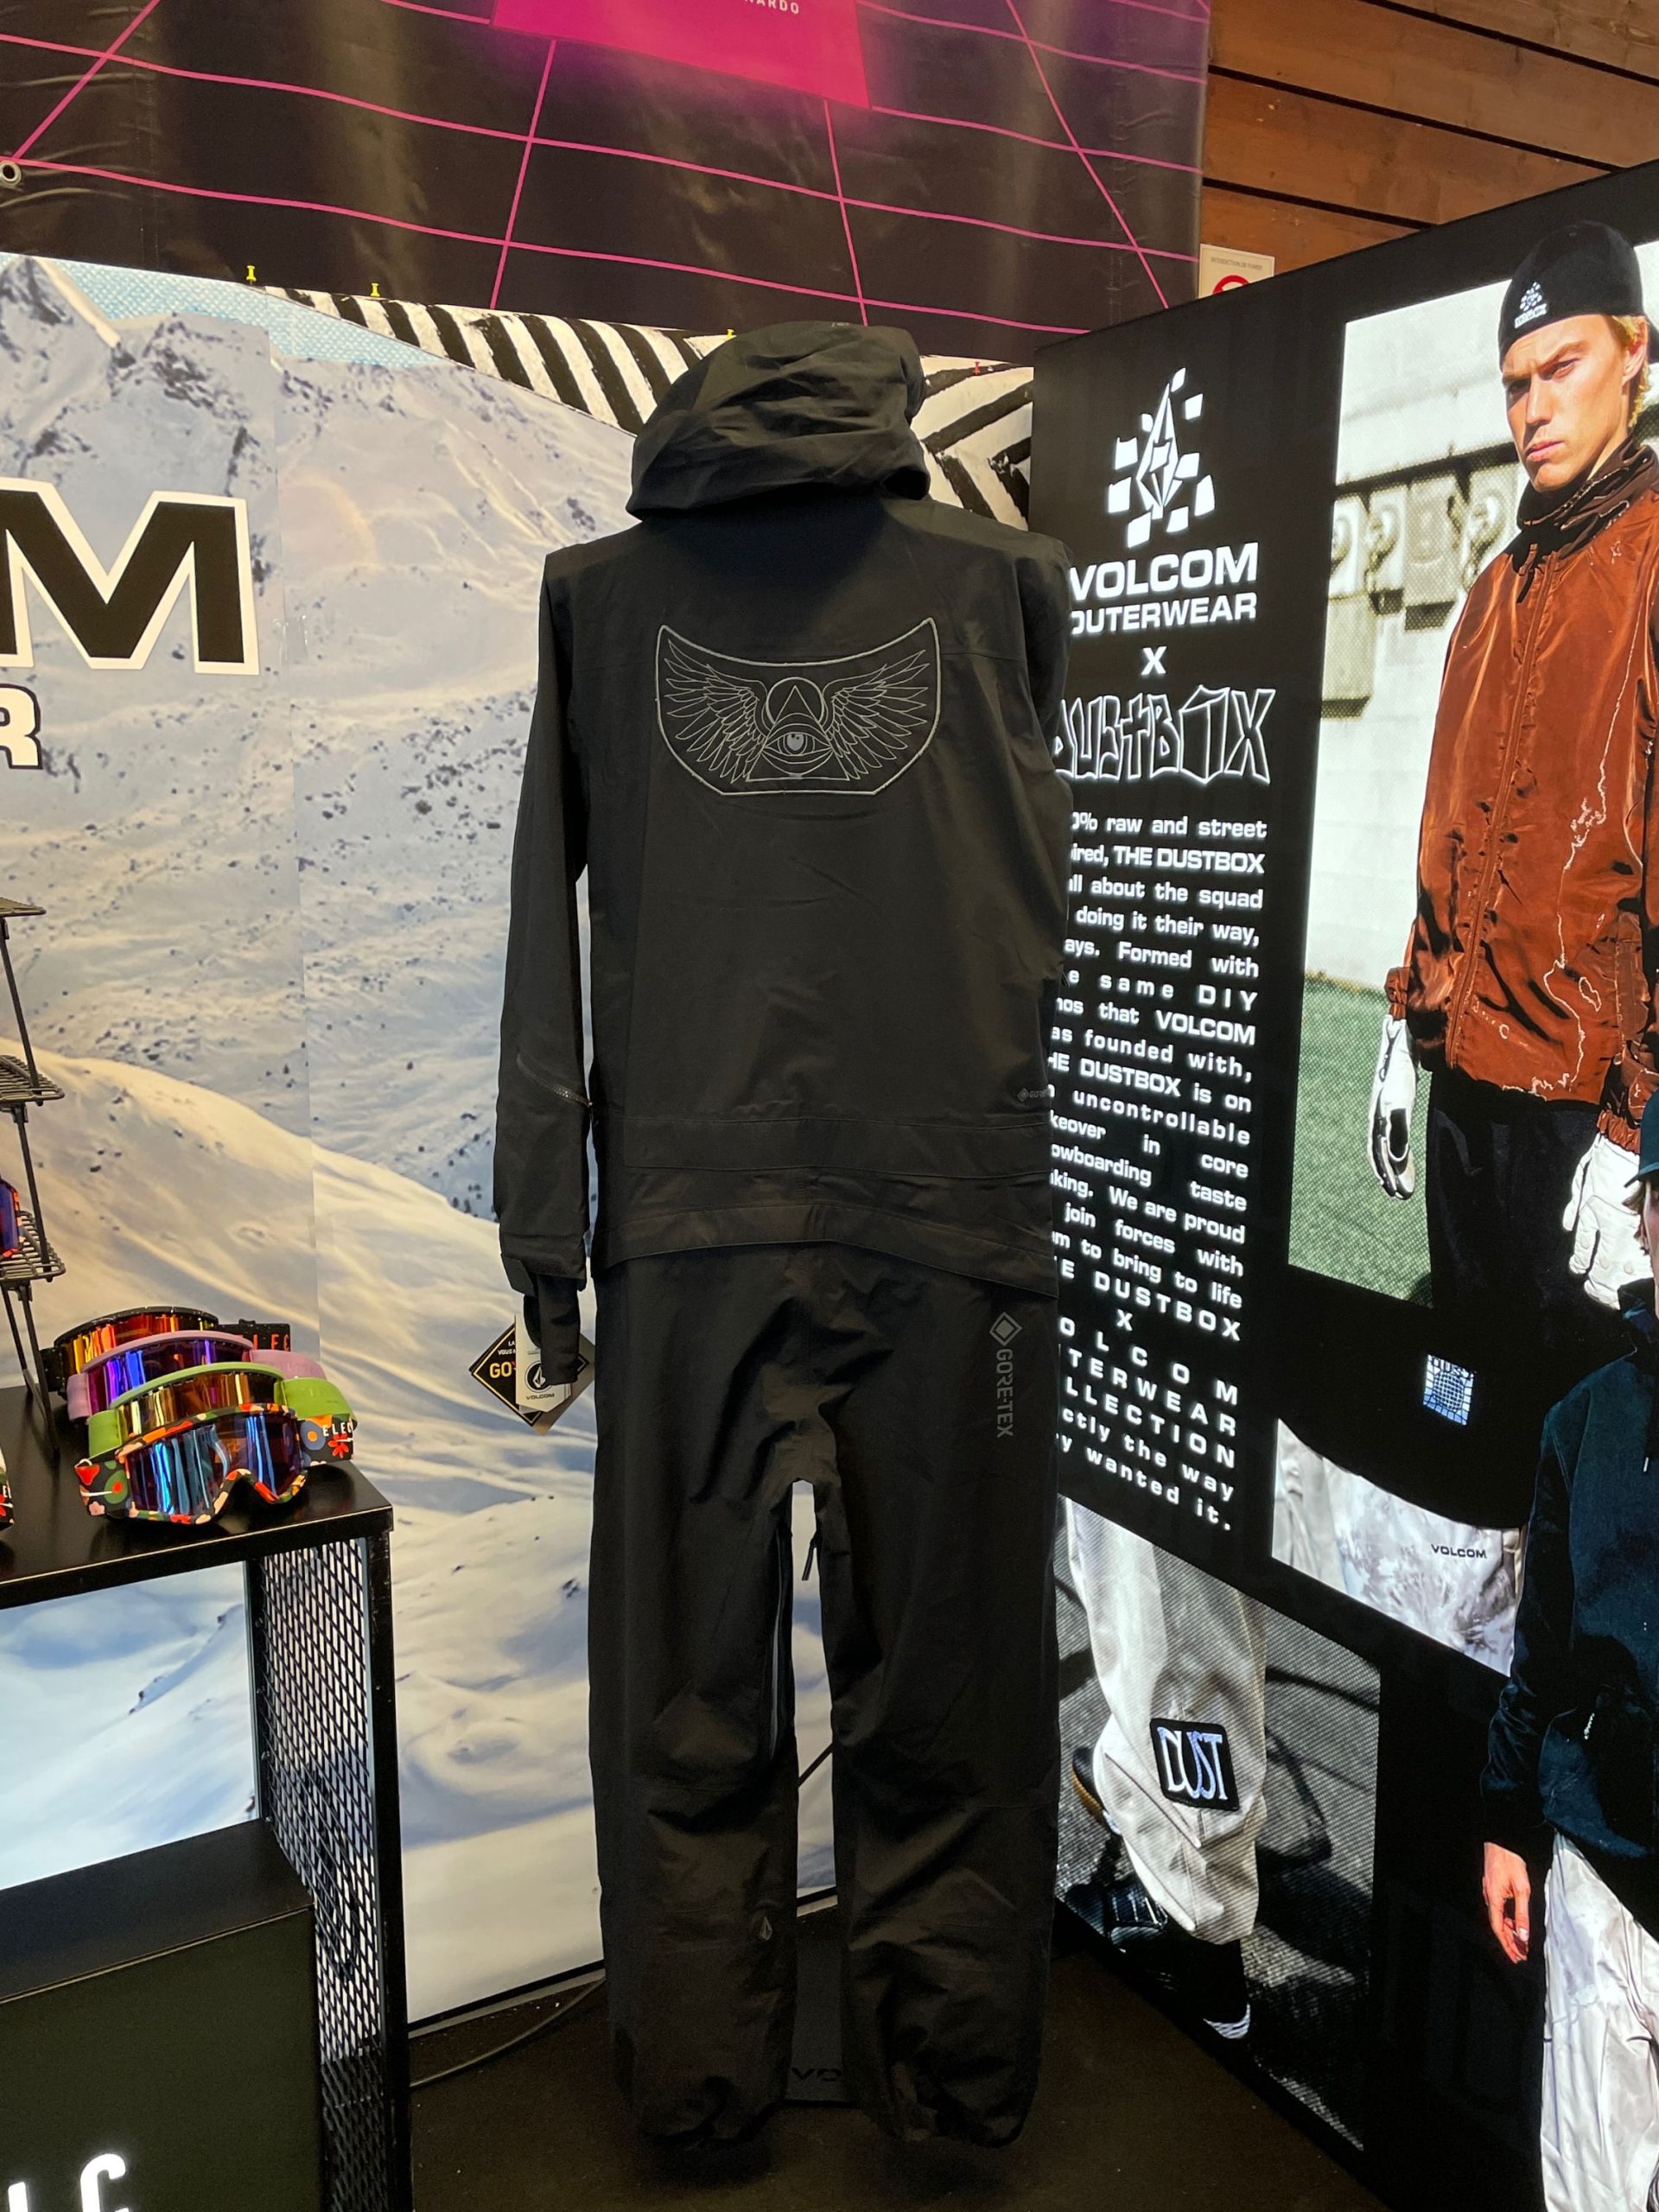 Volcom’s Jamie Lynn pro model outerwear with one of his artwork designs on the back of the jacket